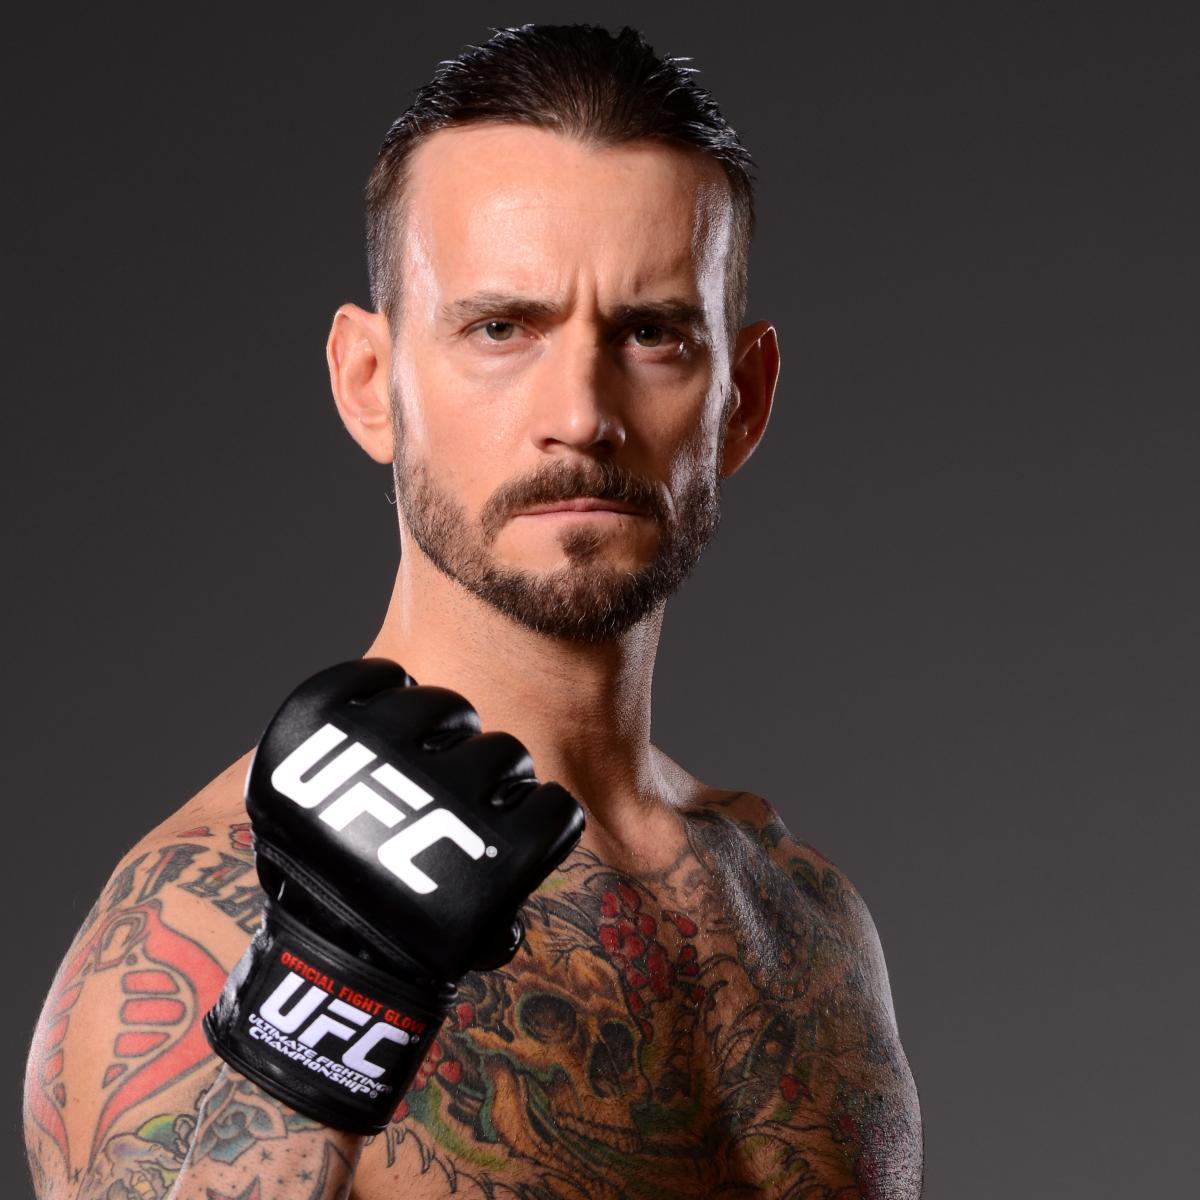 CM Punk's EA UFC 2 Video Game Rating, Image Reportedly Revealed